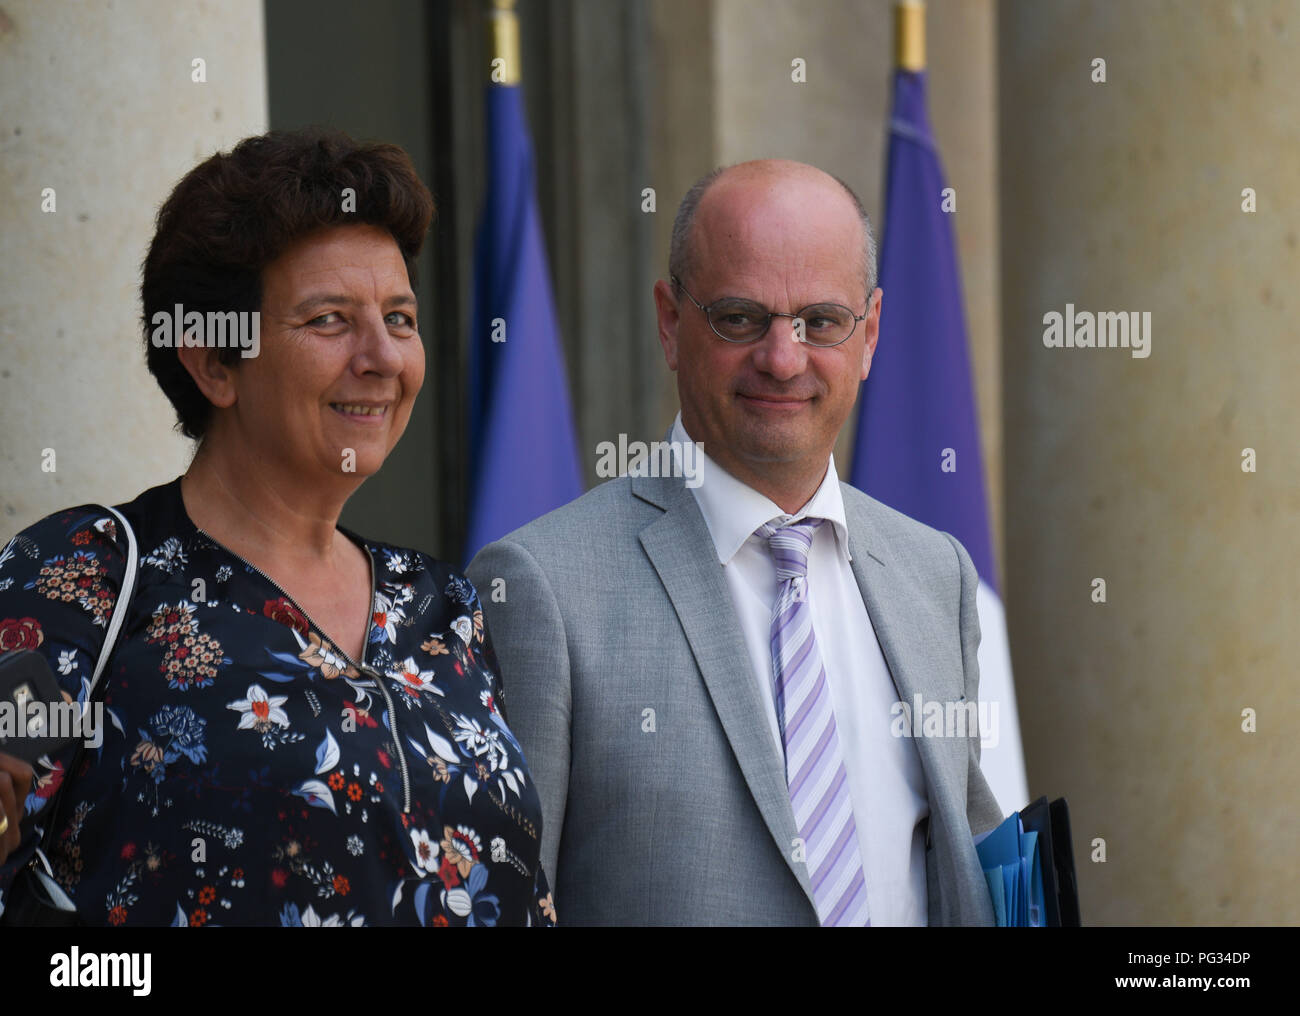 Paris, France. August 22, 2018 - Paris, France: French Minister of Higher  Education Frederique Vidal (L) and Minister of education minister Jean-Michel  Blanquer leave the Elysee palace after a Council of Ministers.